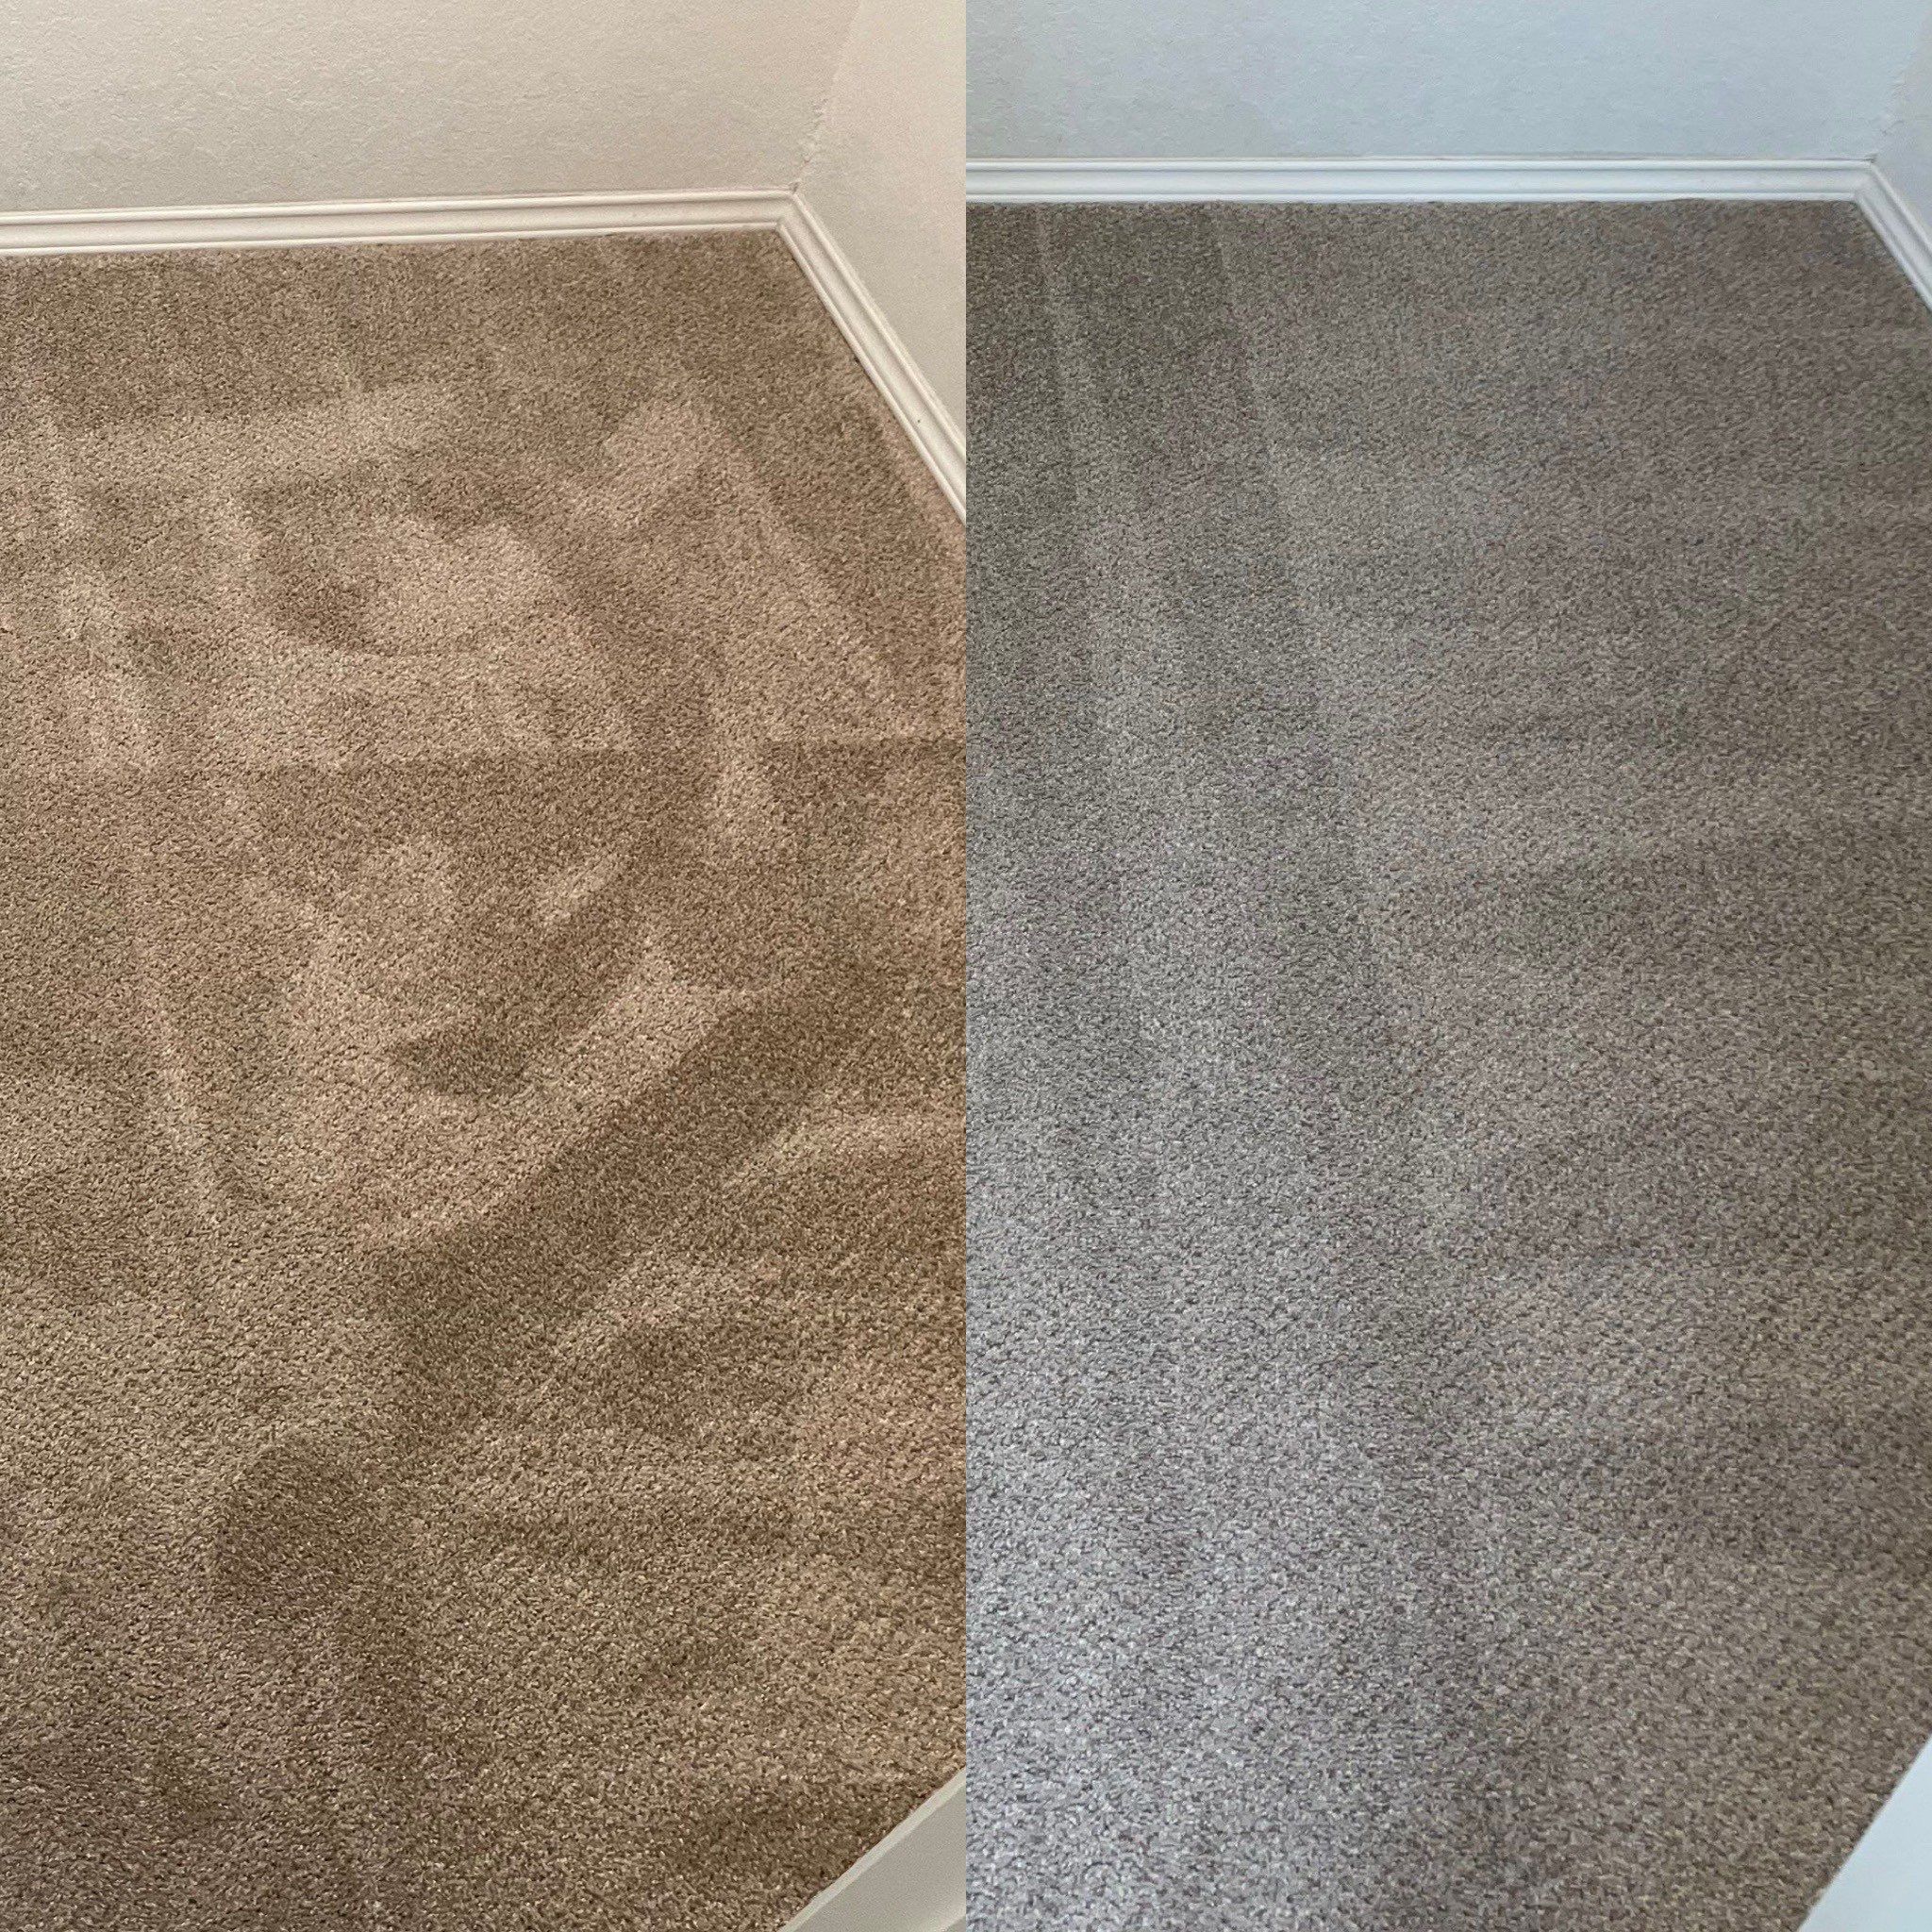 carpet cleaning services are being performed in these photos showing before and after results on carpeted floors